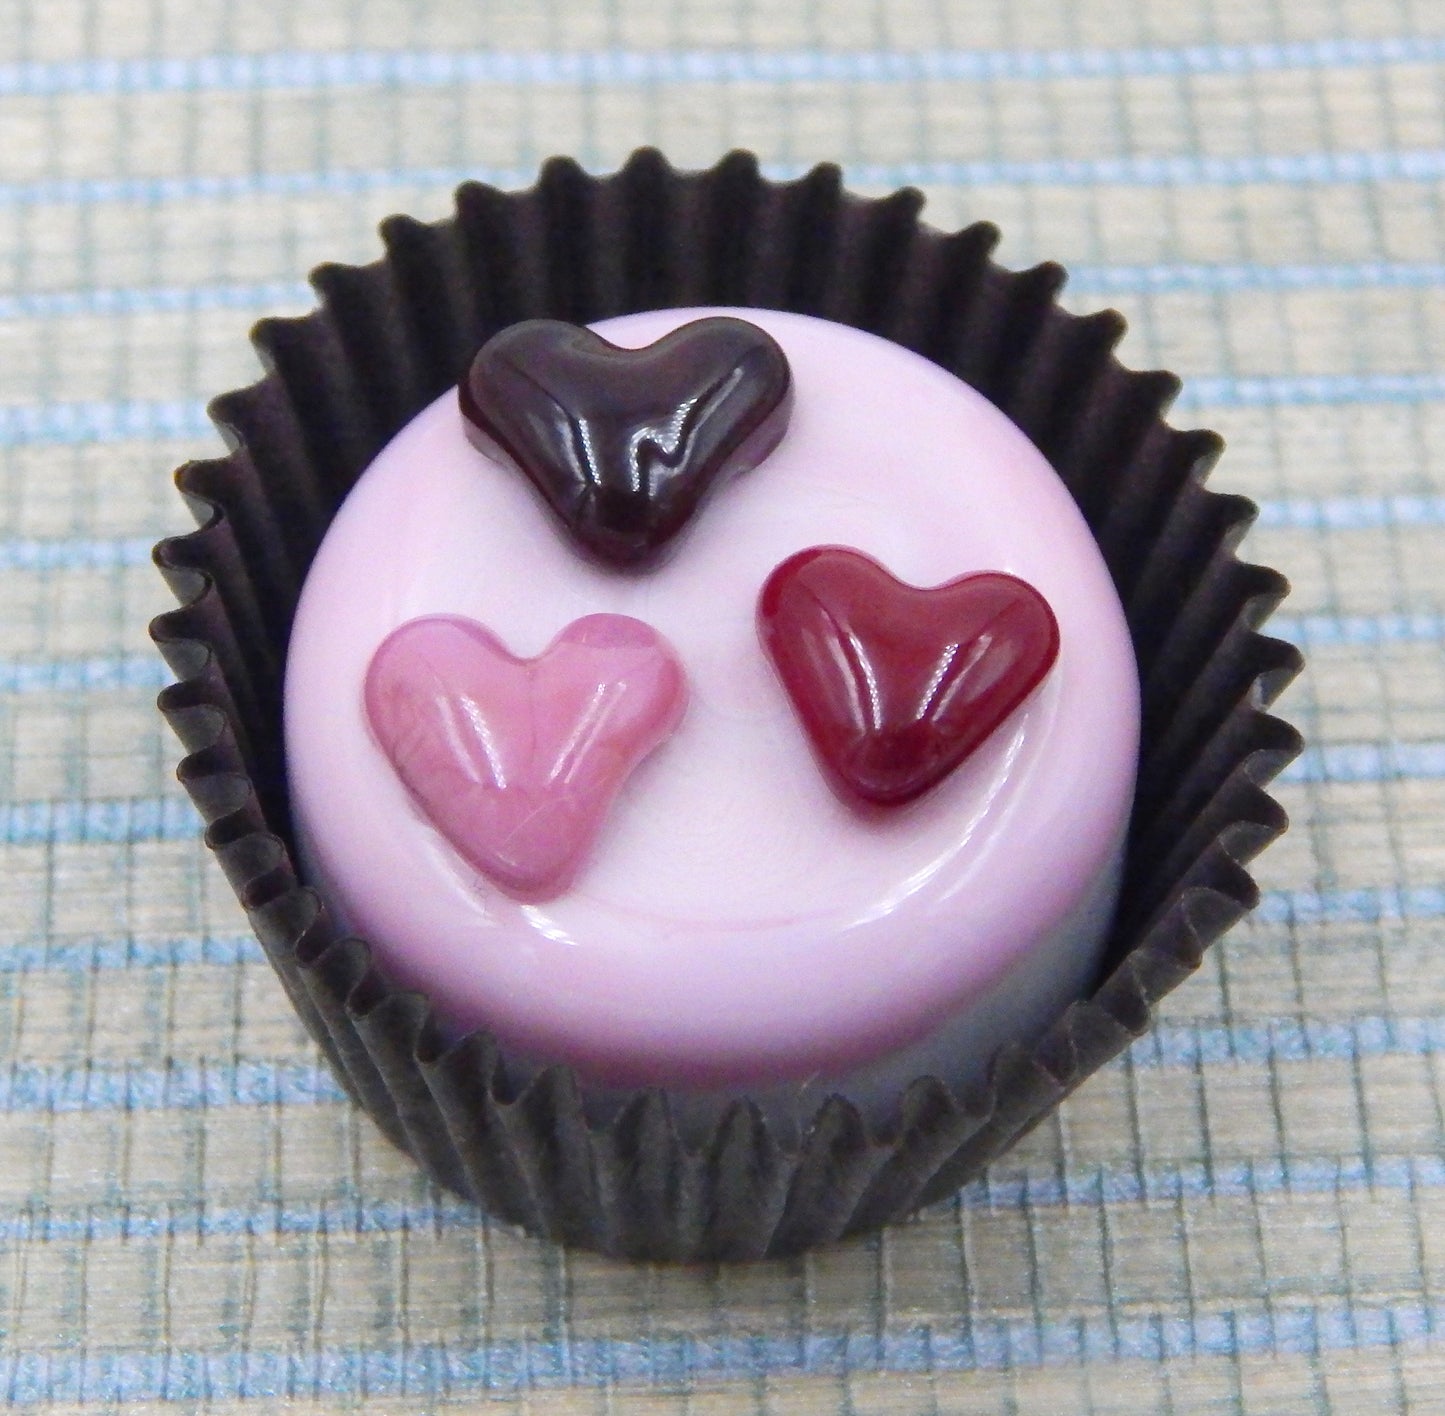 Chocolates with Three Mini Hearts - Assorted Colors (14-042+)